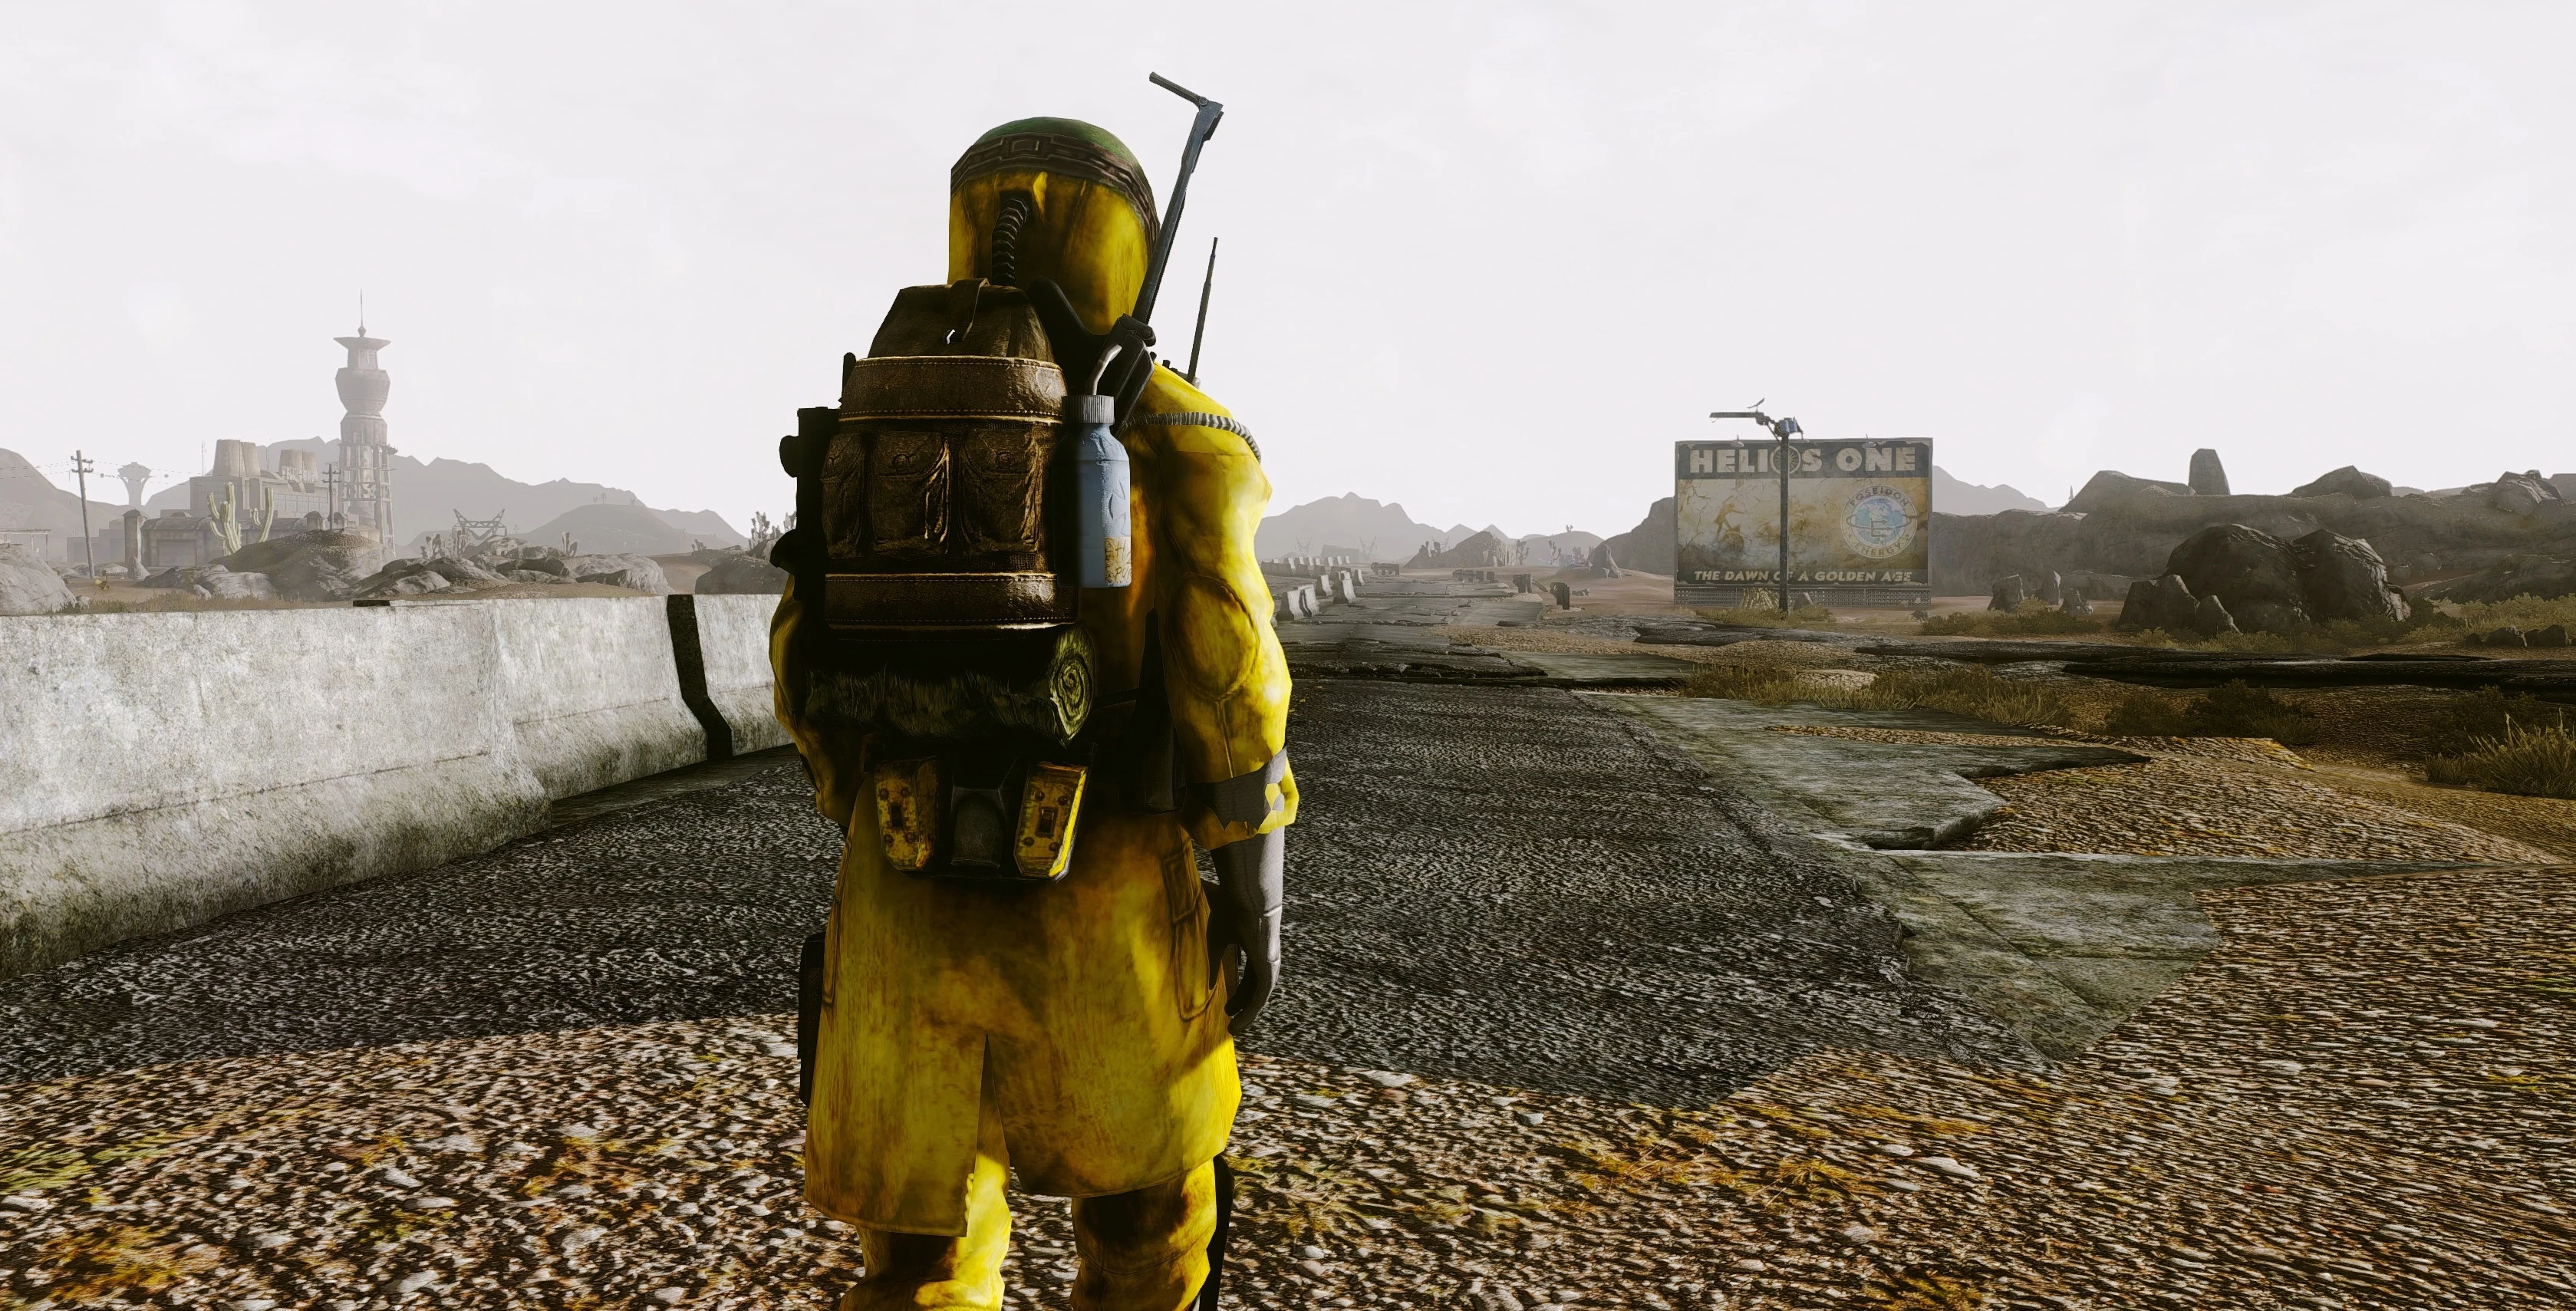 Fallout new enb. Overgrowth ENB Fallout New Vegas. Фаллаут новый Вегас ЕНБ. Fallout New Вегас ENB. Overgrowth моды.